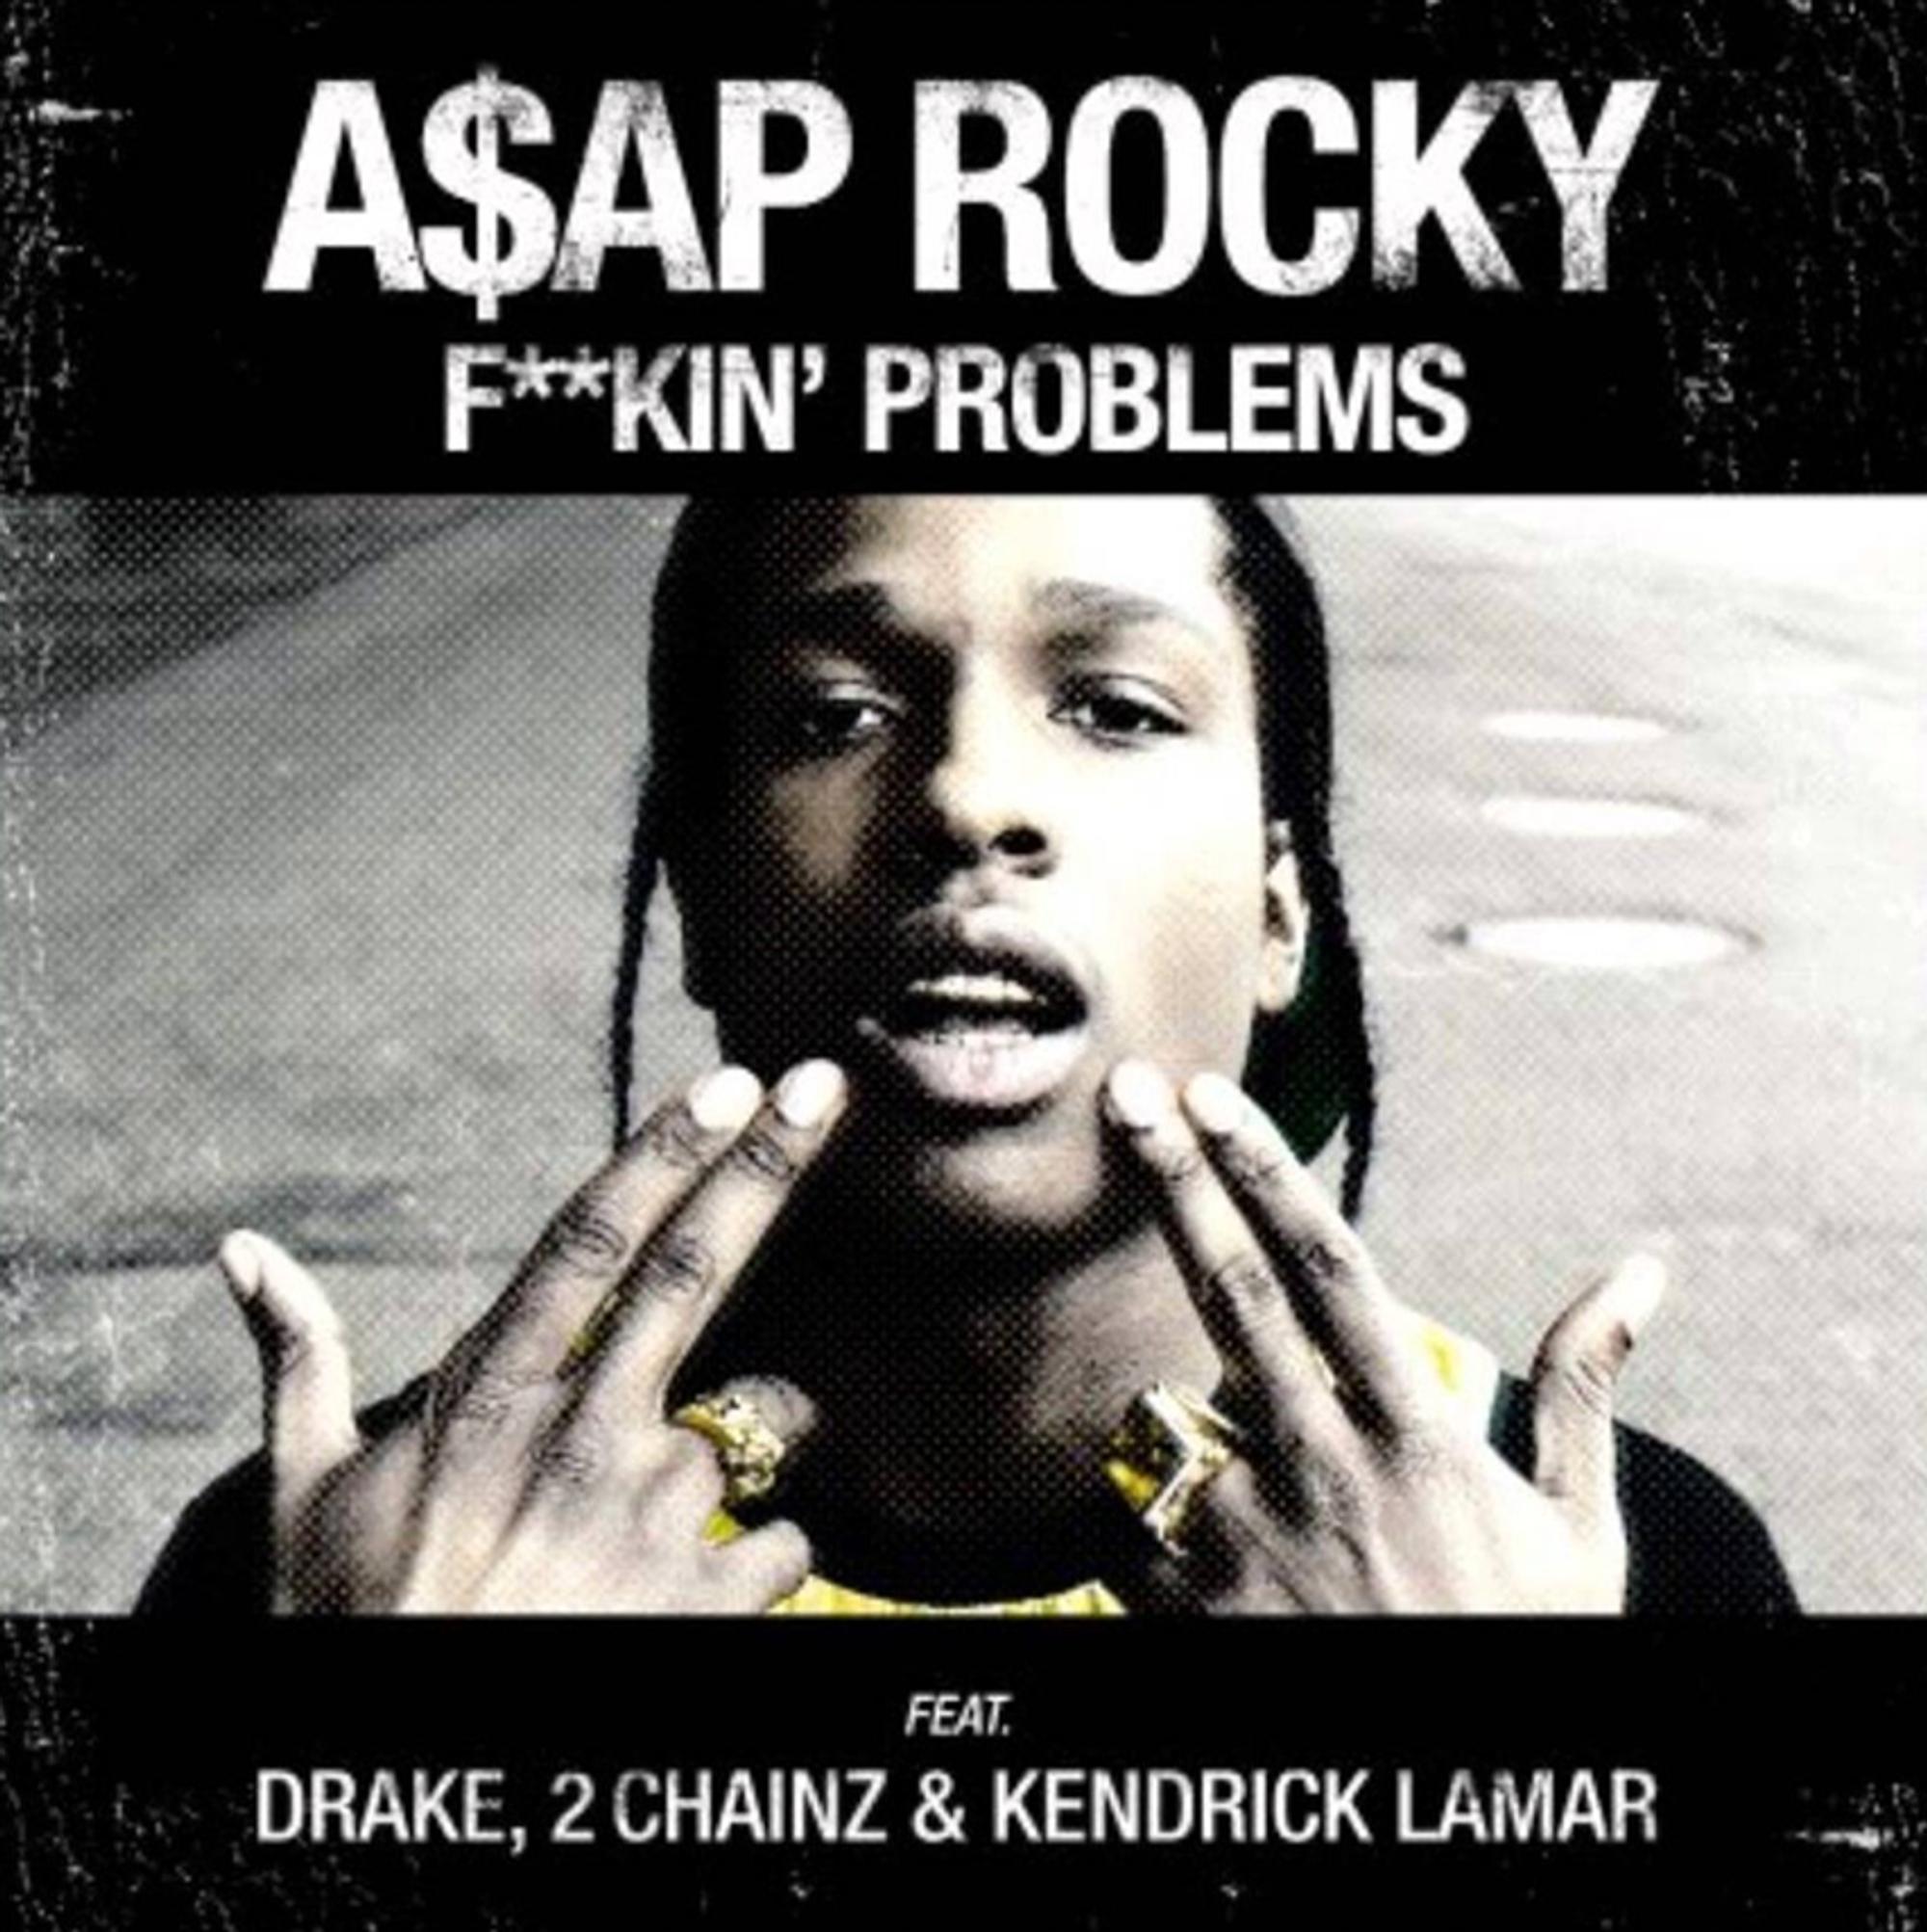 Cover art for A$AP Rocky's F**kin' Problems